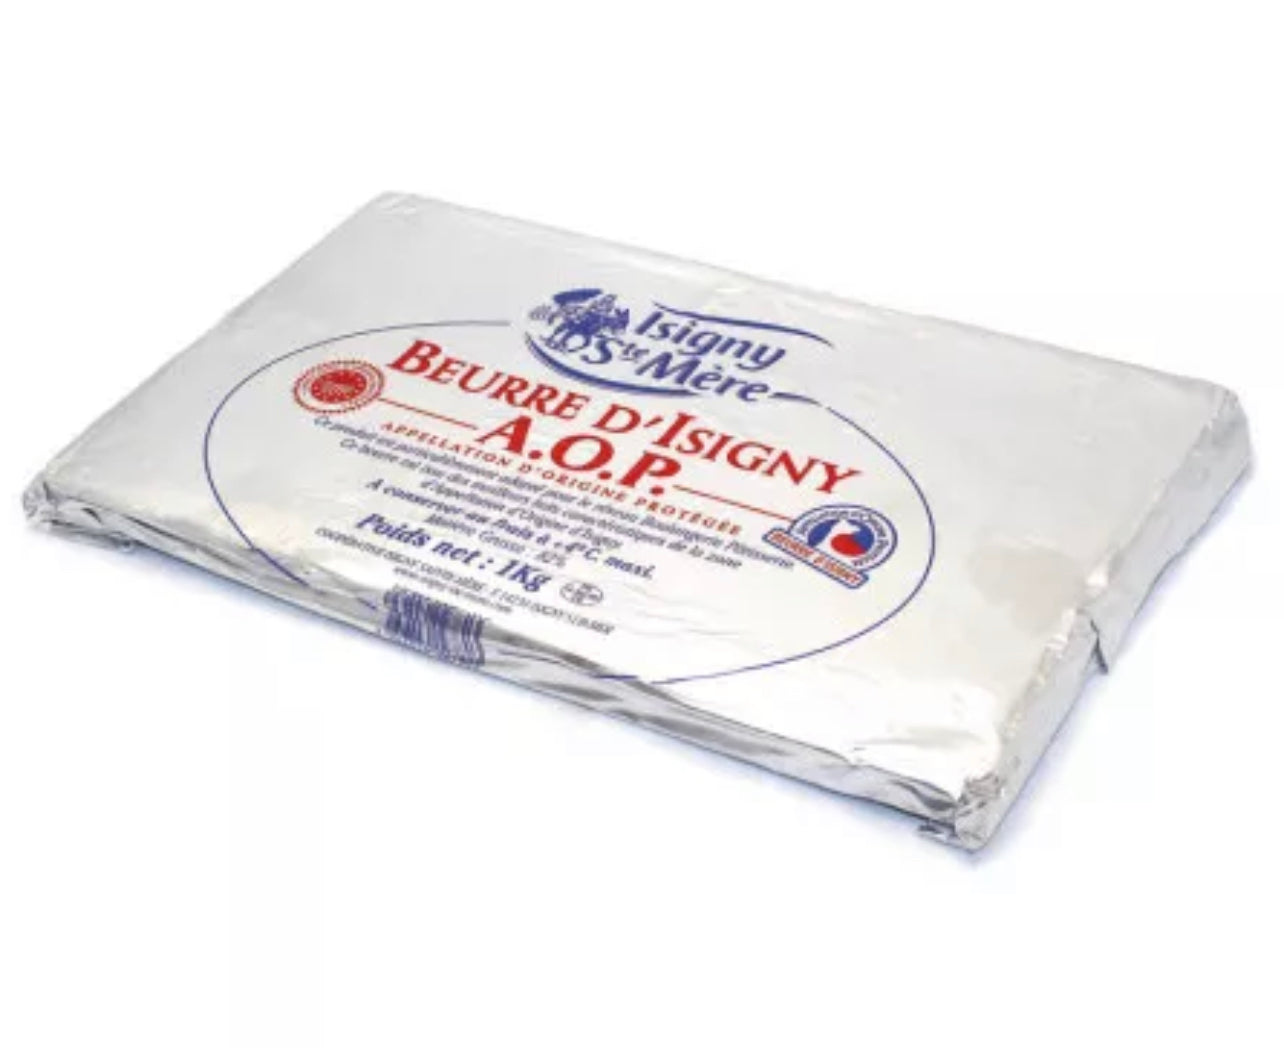 Isigny AOP butter special torage 82% - 1kg